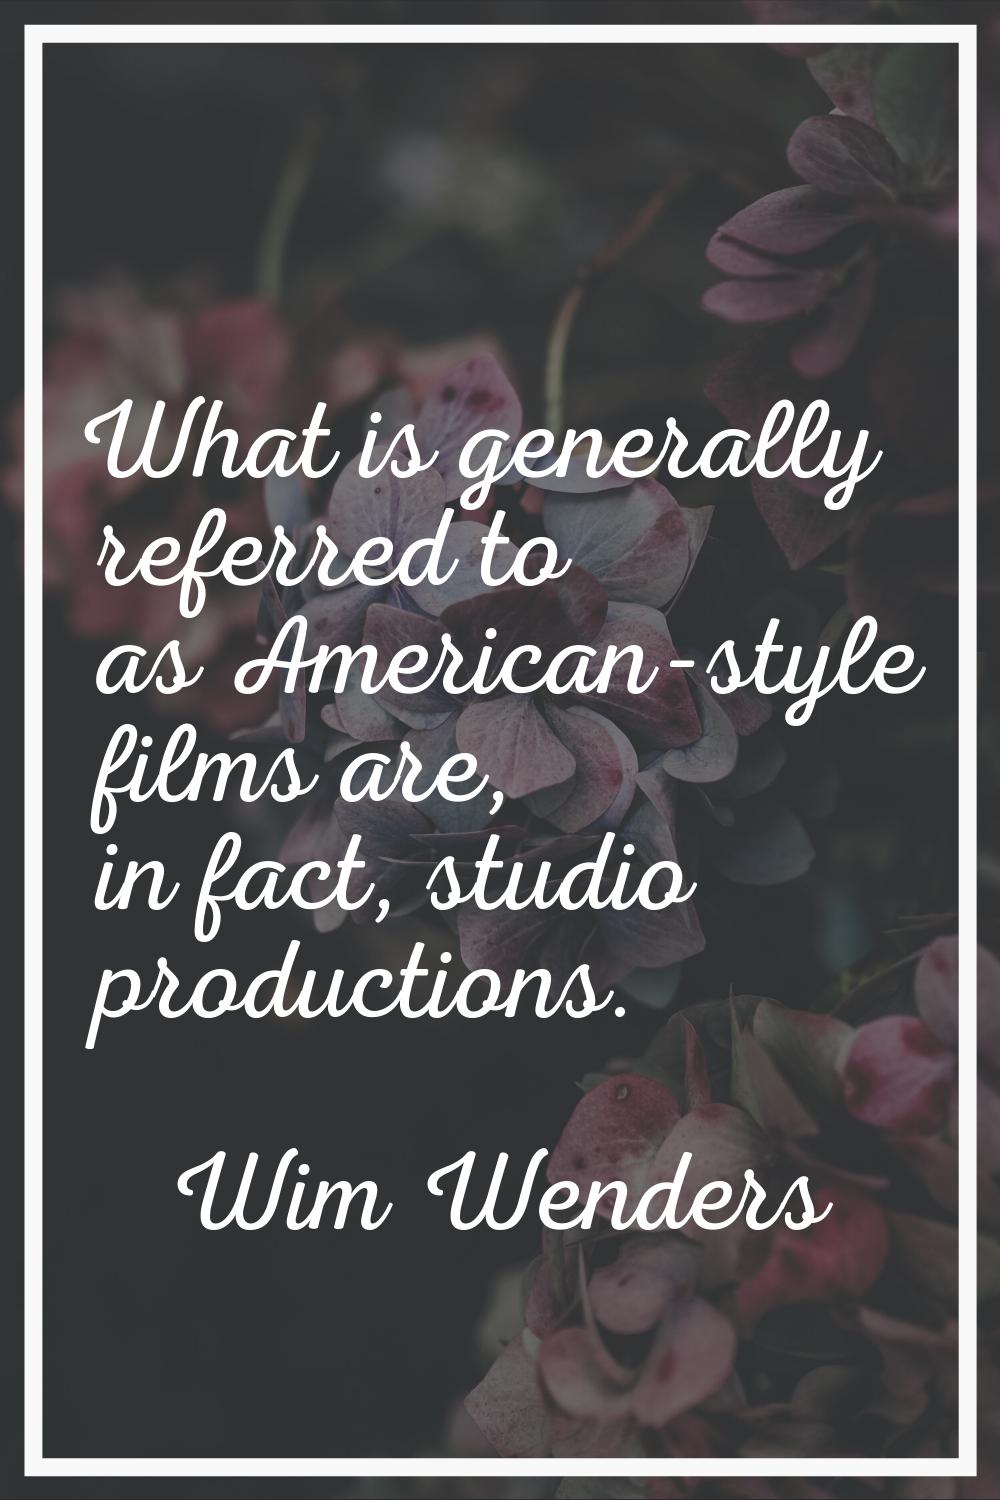 What is generally referred to as American-style films are, in fact, studio productions.